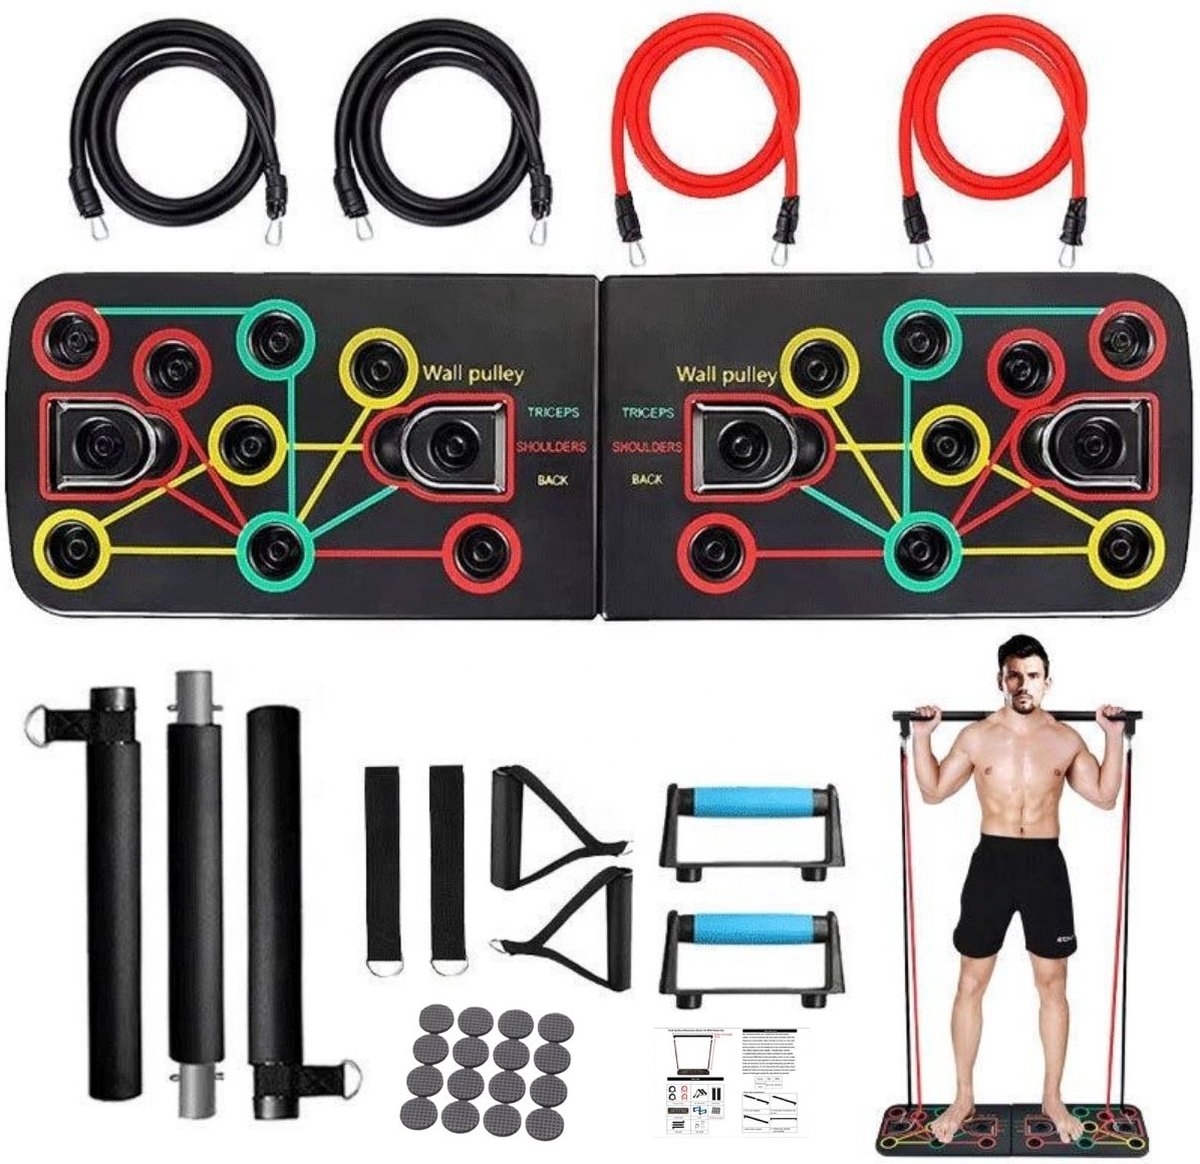 JT Products Push Up Bord – Inclusief Pilates Bar en Weerstandsbanden – Krachttraining - Opdruk Bord Fitness – Push Up Grips – Push up Bars – Home Gym – Thuis Fitness – Halterstang – Barbell - Pilates Stick – Resistance Band – Opdruksteunen - Crossfit - JT Products